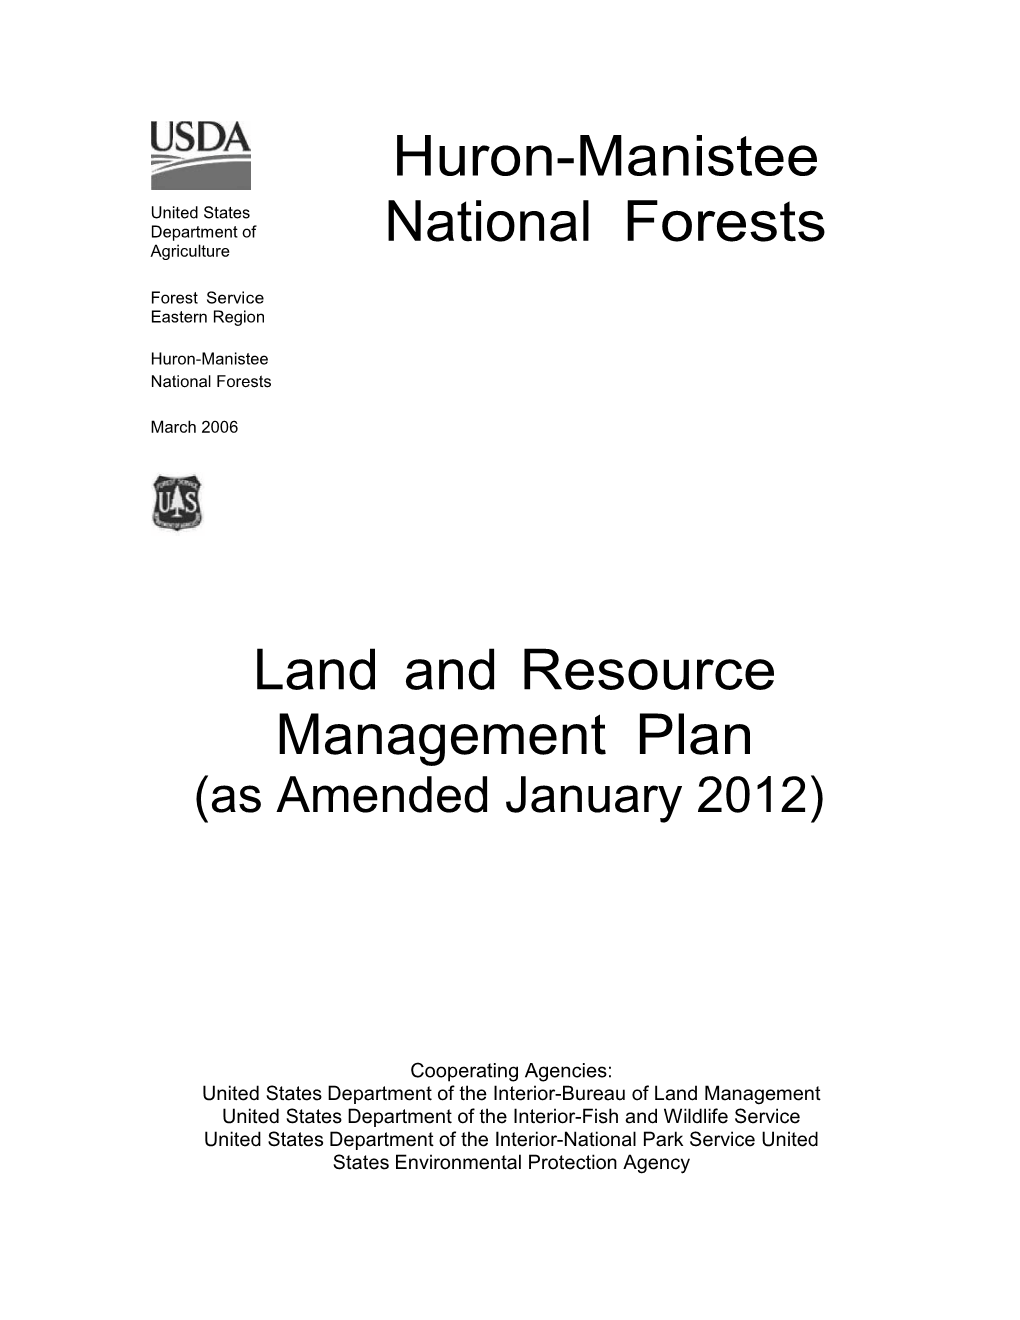 Huron-Manistee National Forests Land and Resource Management Plan